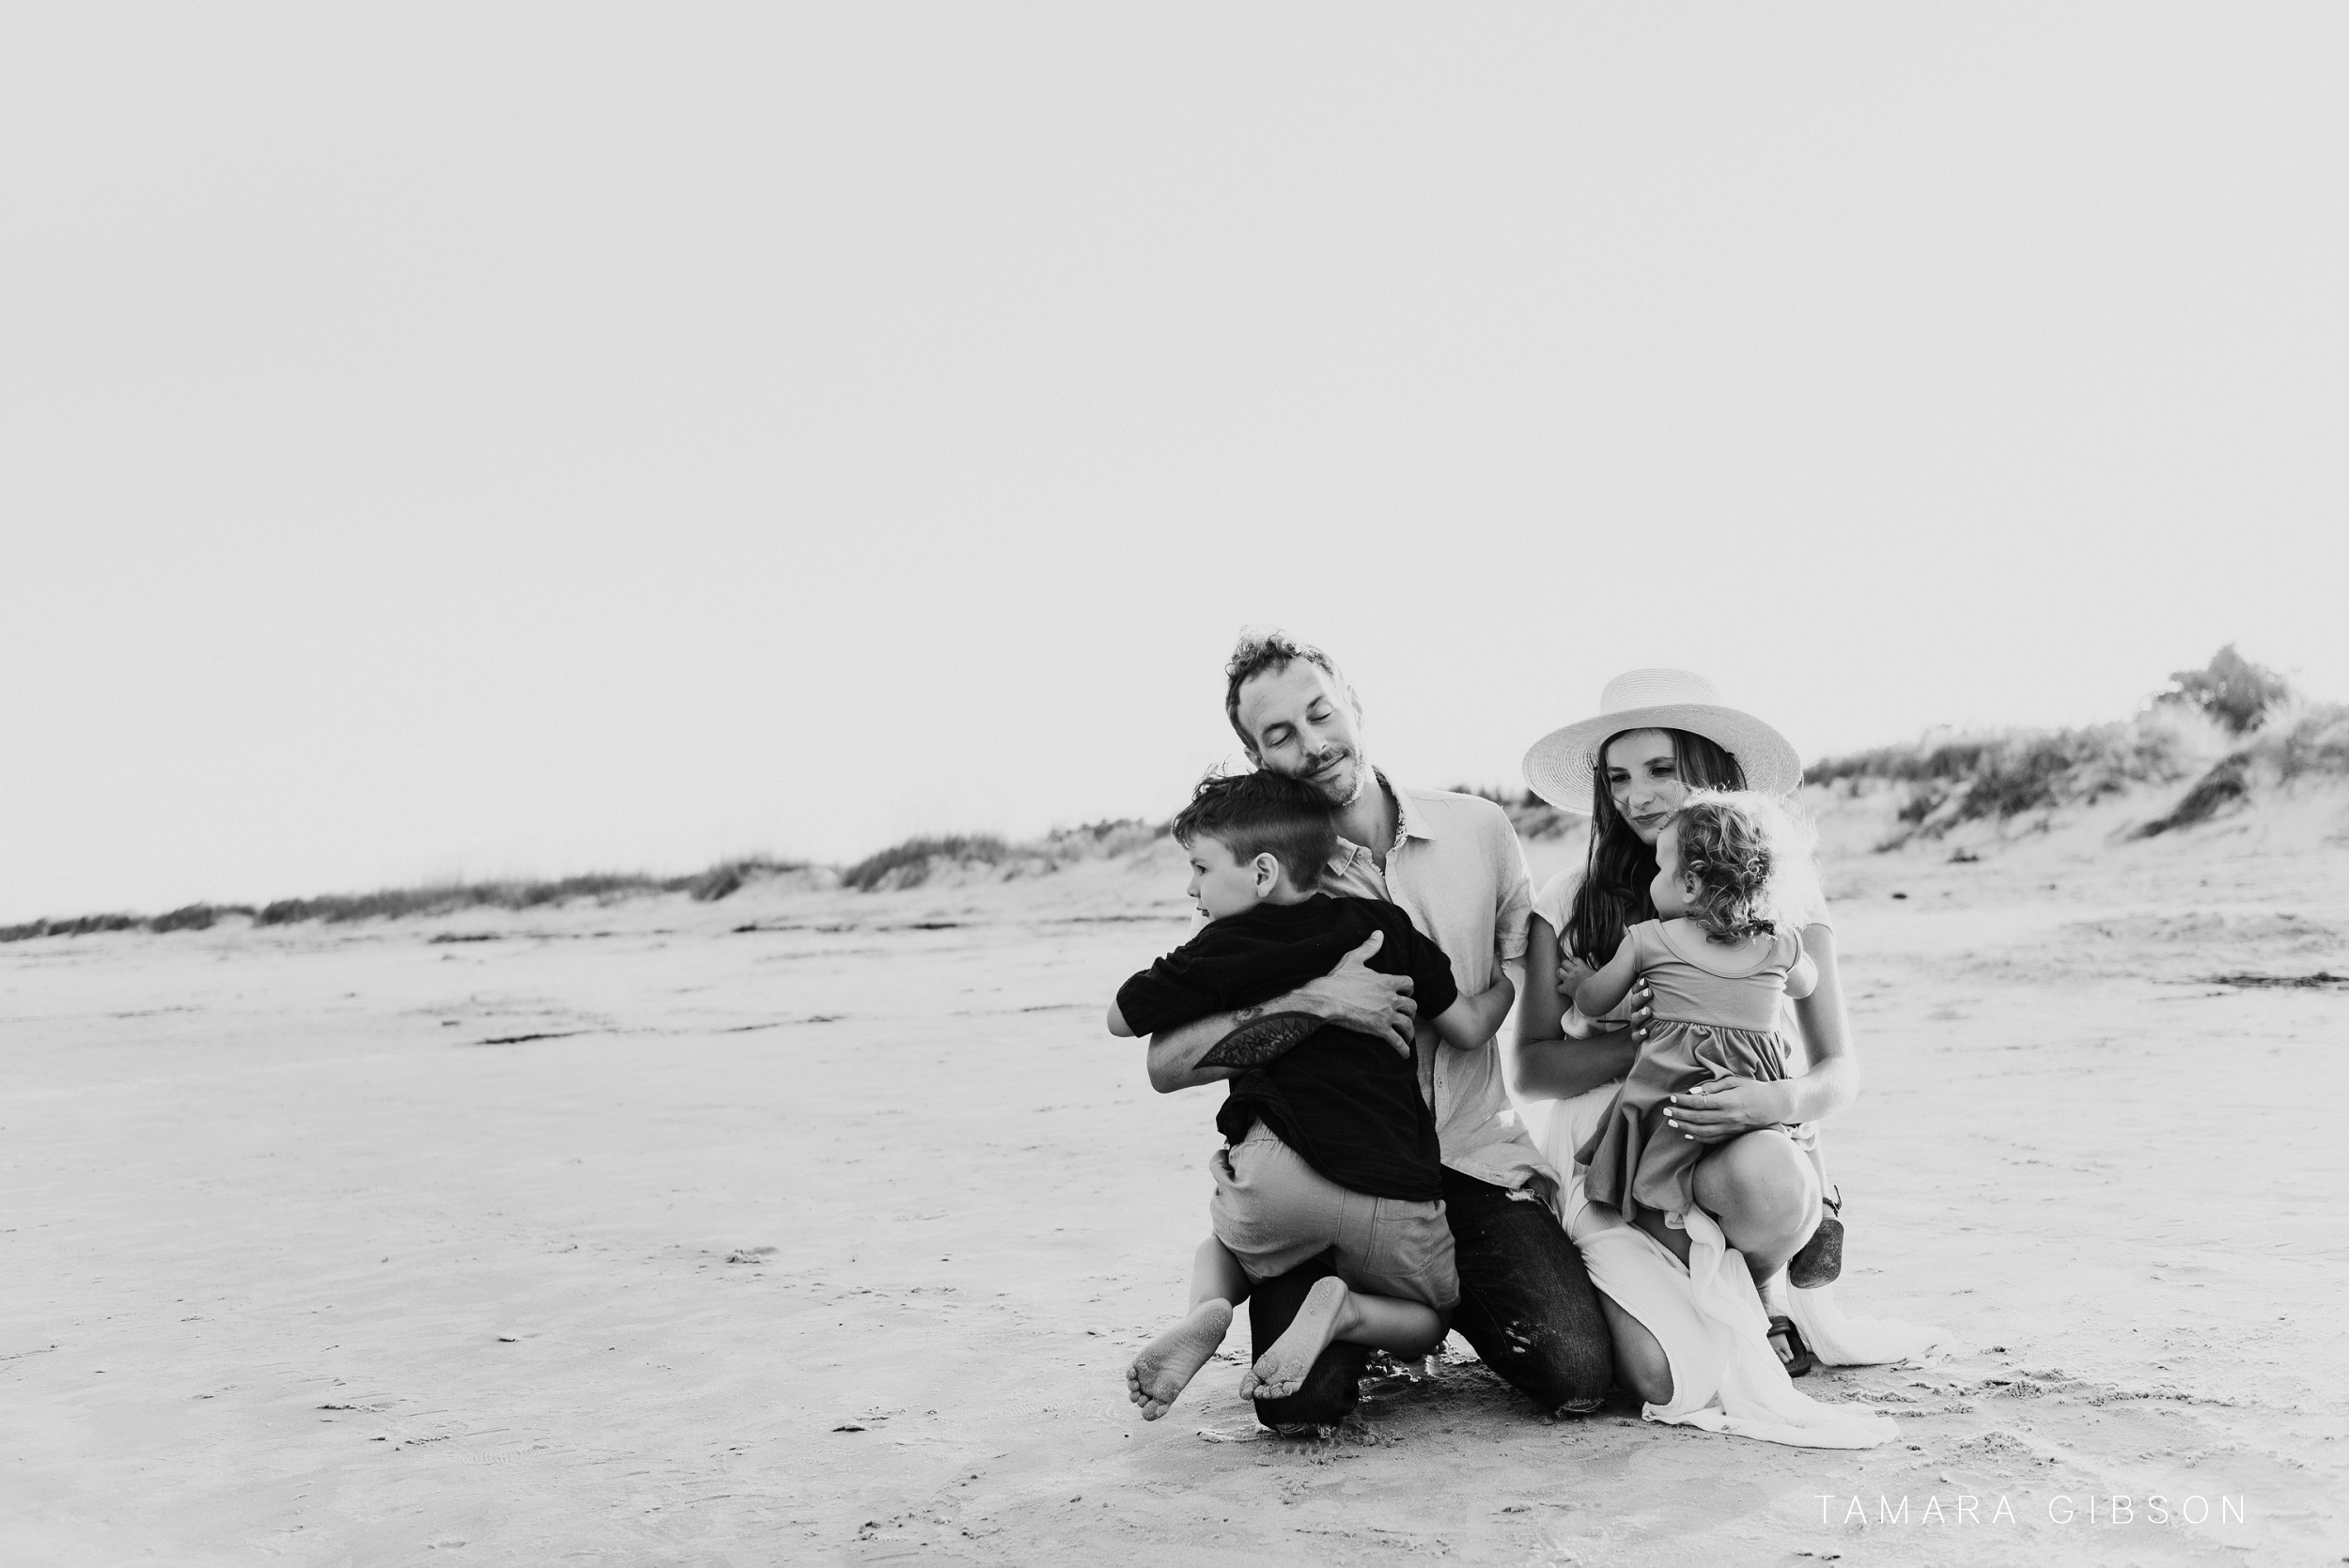 Hallen family of four embrace on the beach.